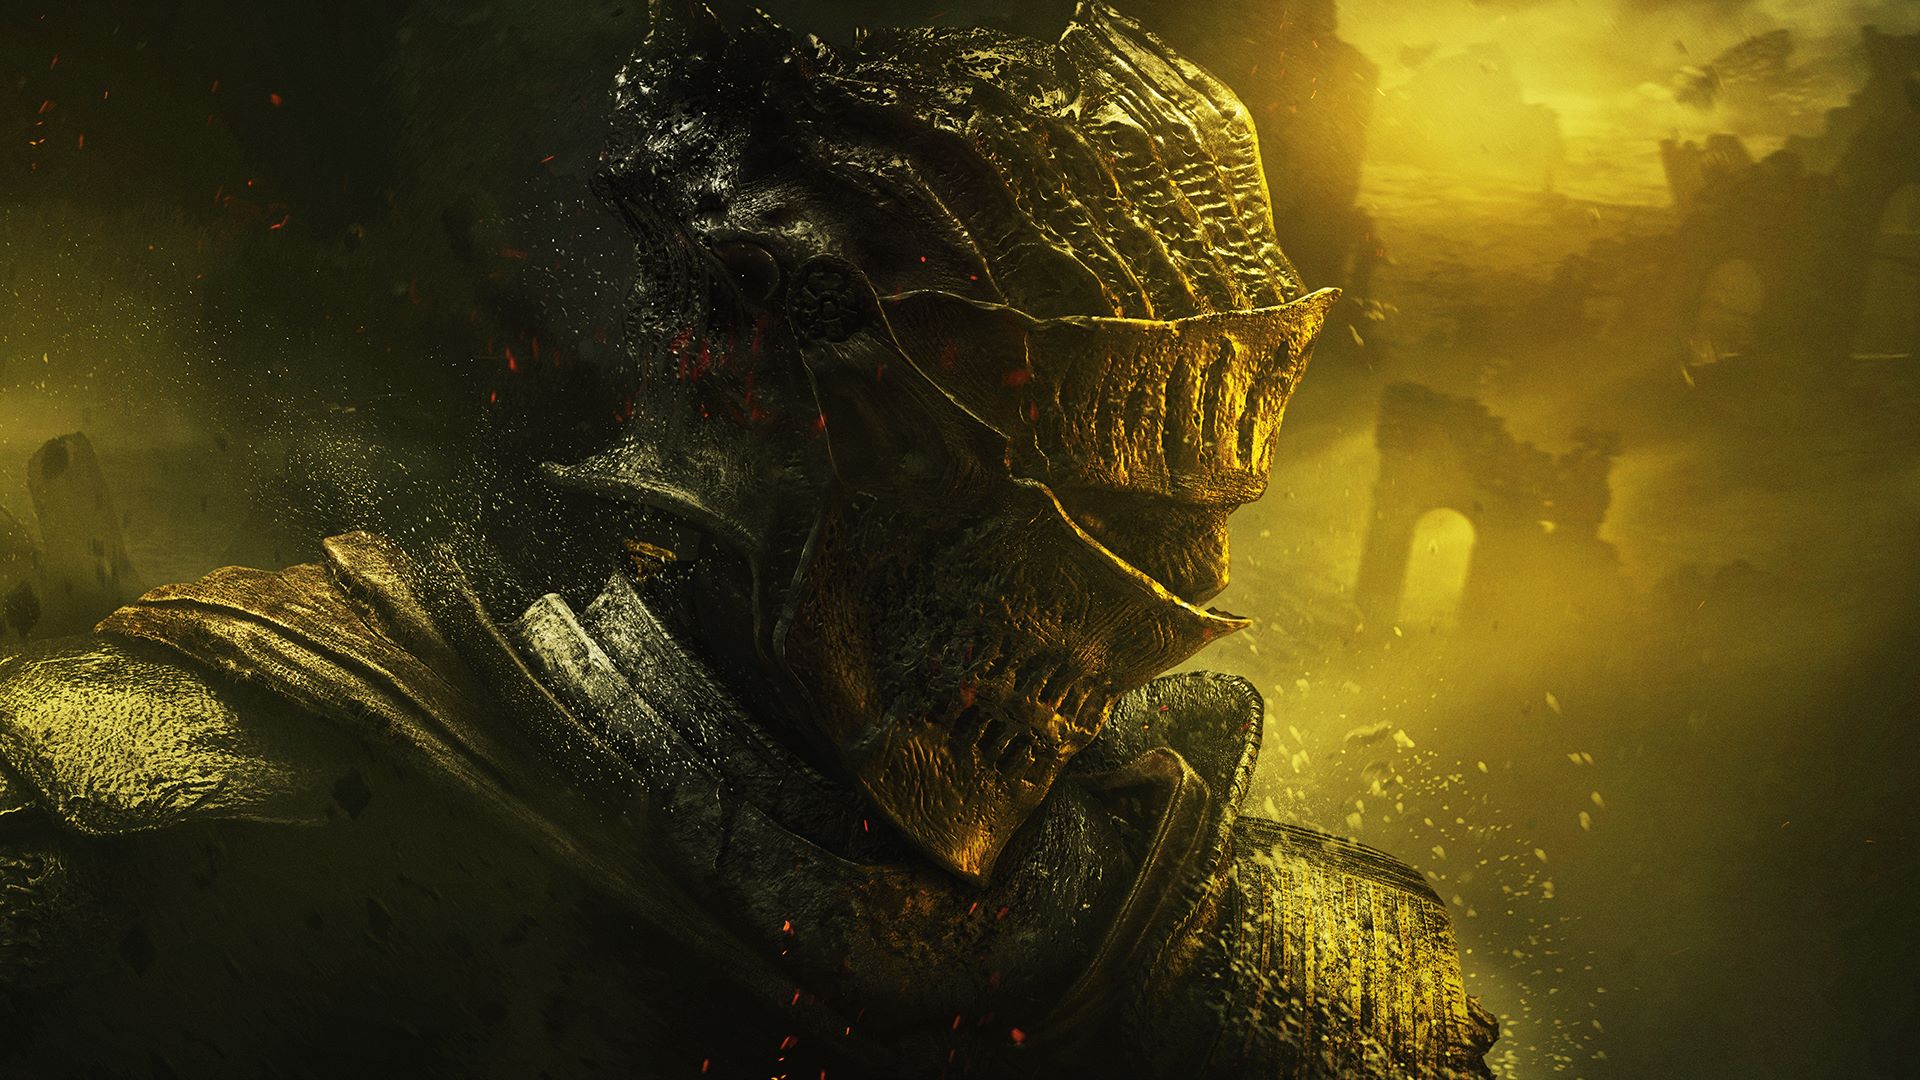 Image for FromSoftware's Dark Souls series has now shipped 25m units